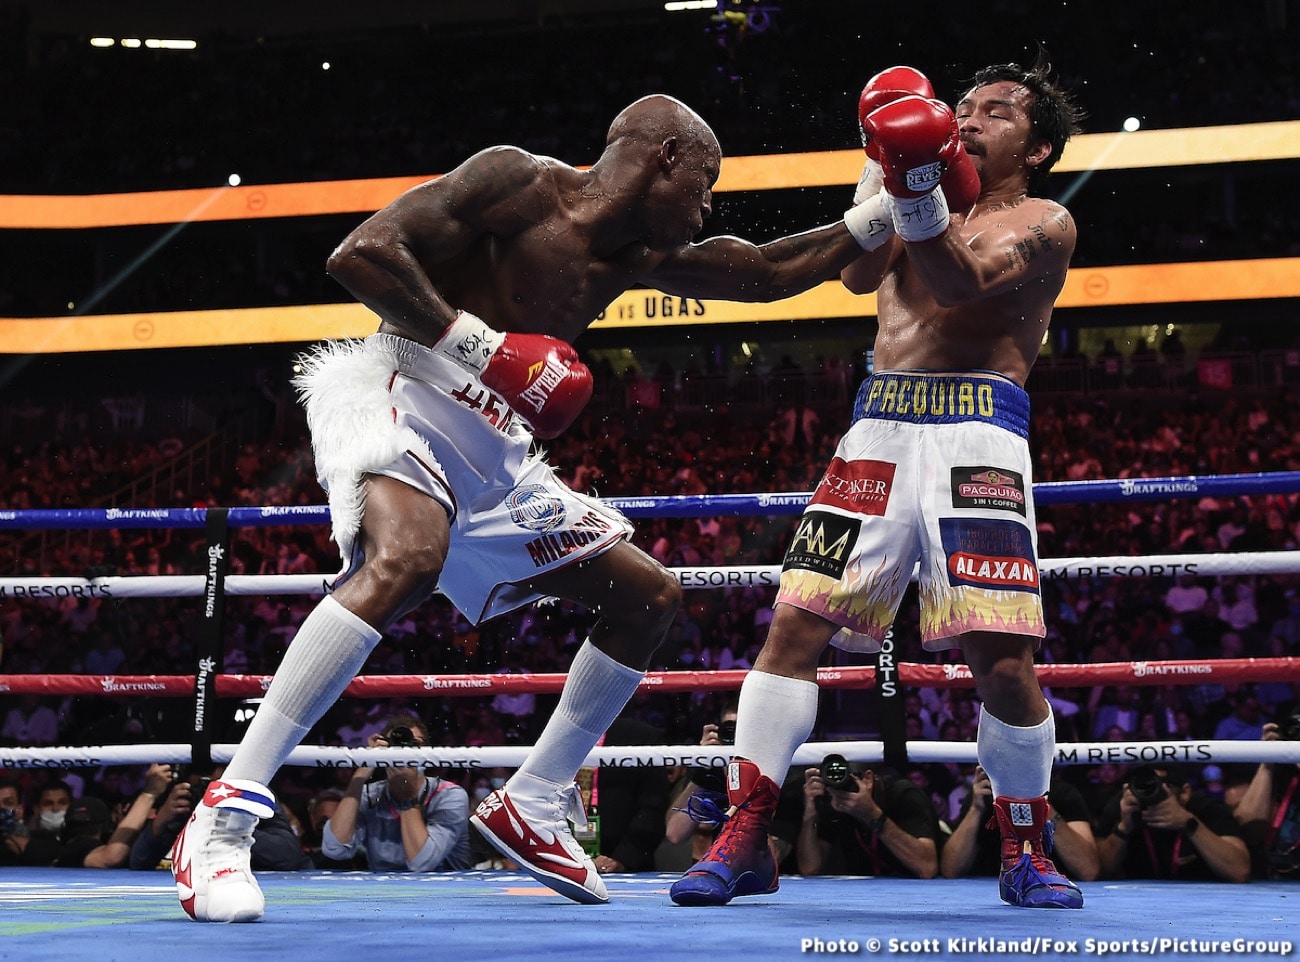 Manny Pacquiao boxing photo and news image